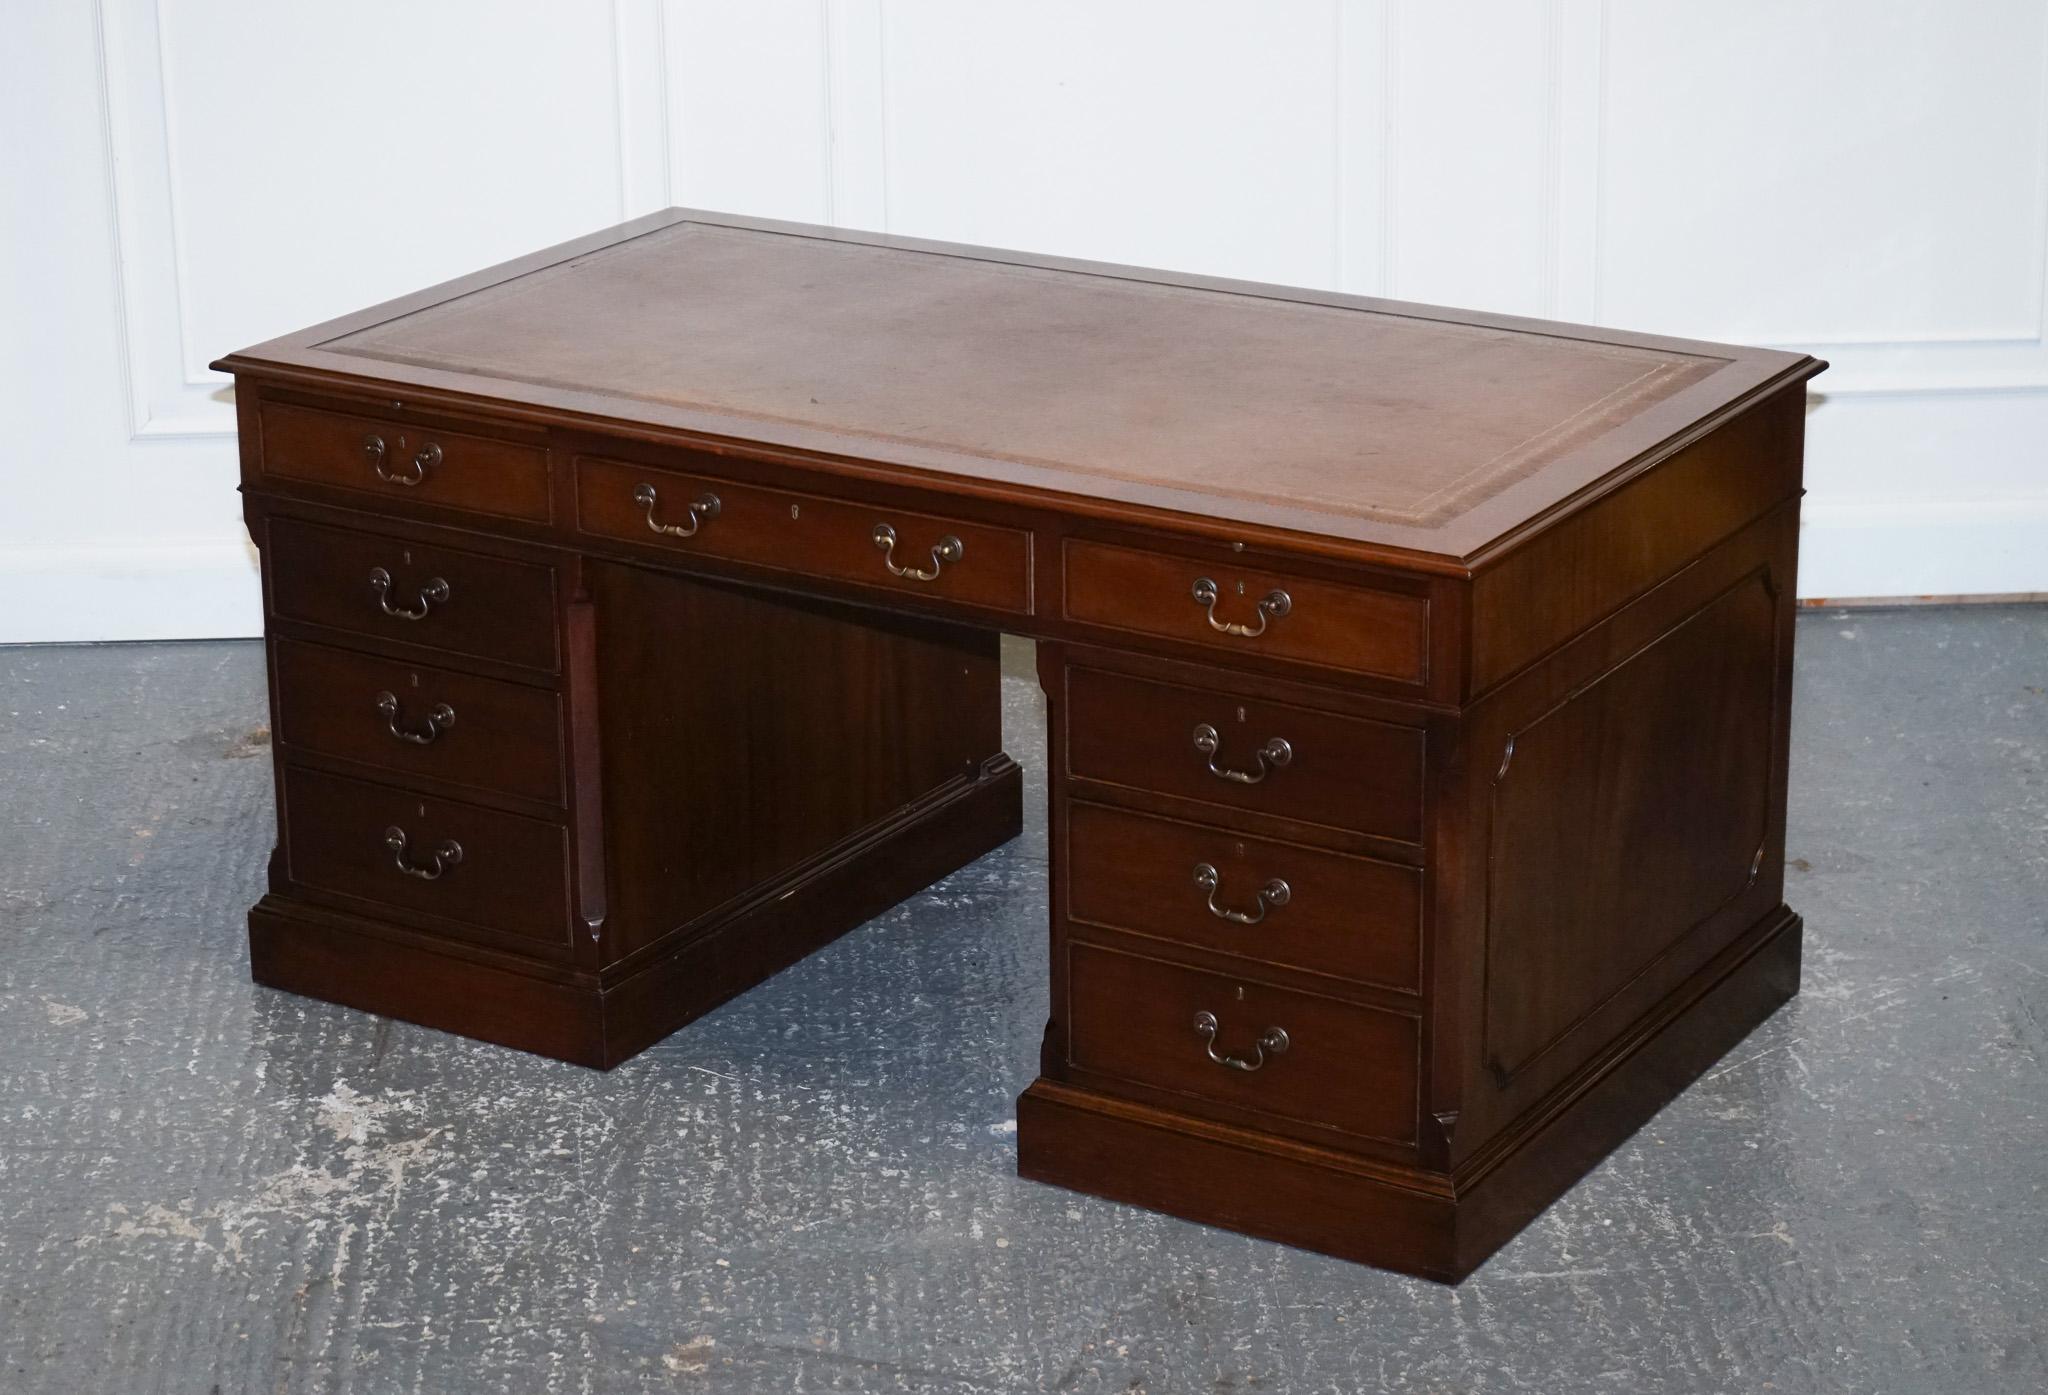 STUNNING LARGE TWiN PEDESTAL DESK BROWN LEATHER TOP SLIDING OUT TRAYS 8 DRAWERS In Good Condition For Sale In Pulborough, GB